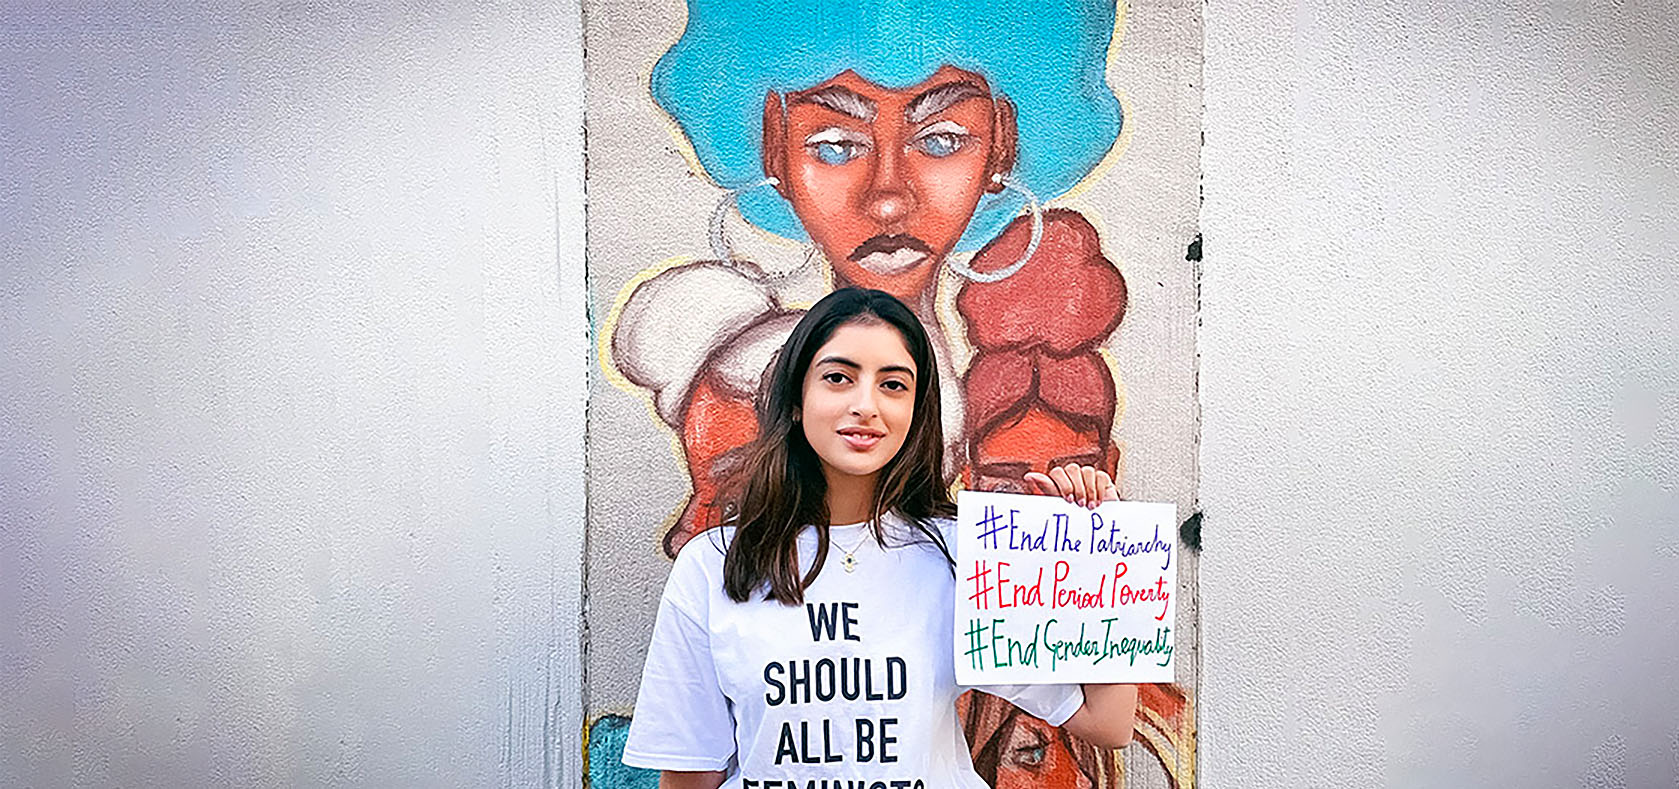 Nanda shows her messages outside Fashion Institute of Technology In New York City, on 3 April 2021. Behind her is a student-painted mural on the theme of Black Lives Matter, with a focus on empowering black women. Photo: Courtesy of Gauri Kanade